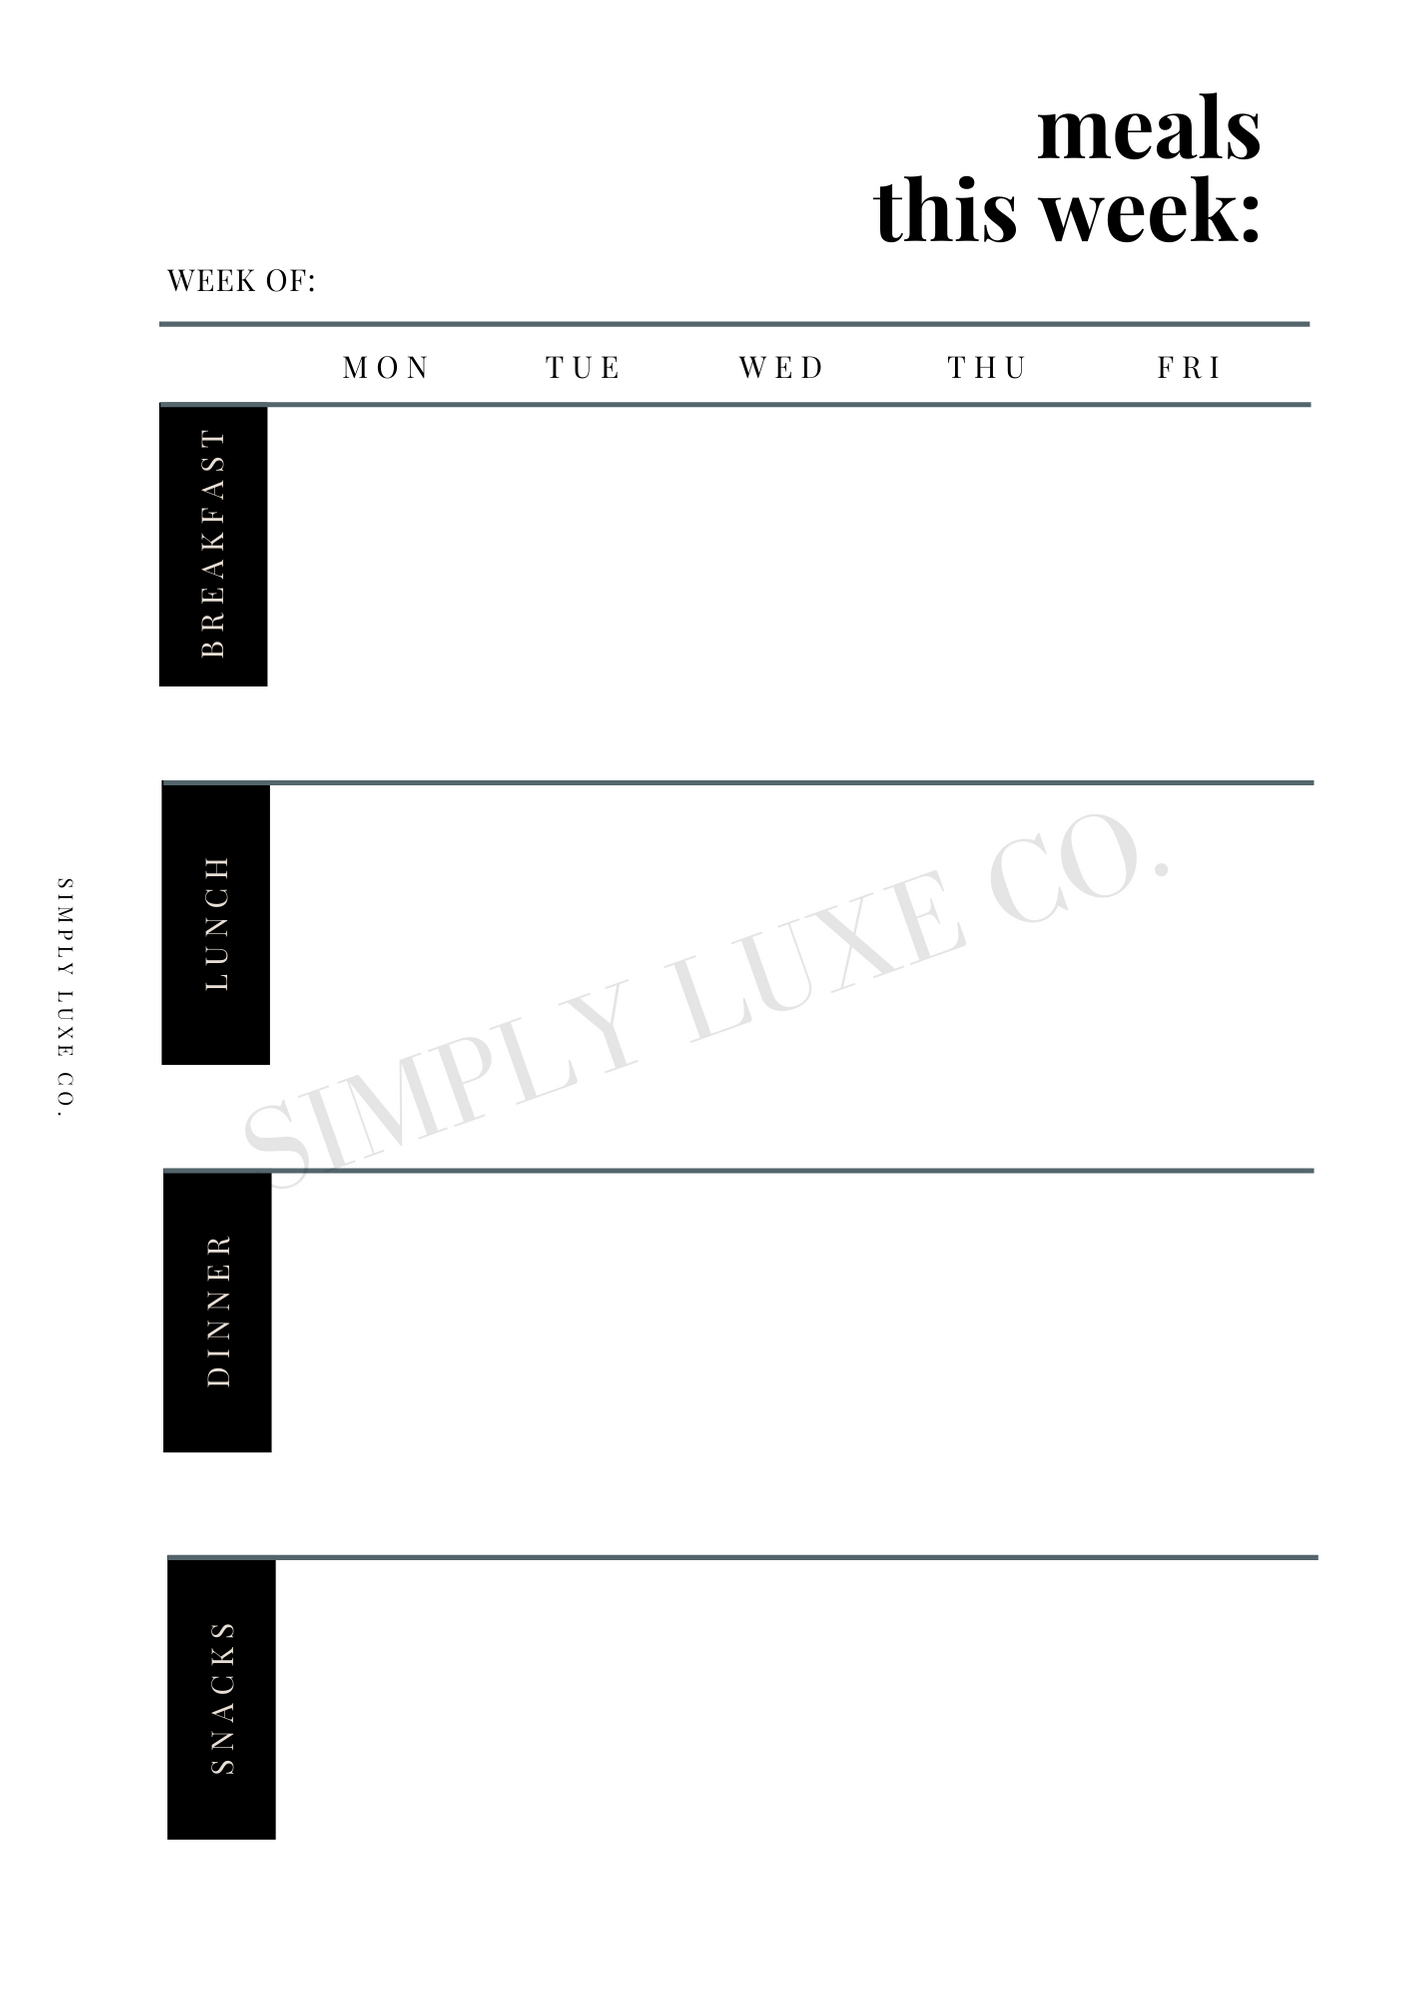 Weekly Meal Planning Printable Inserts - Available in 2 colors